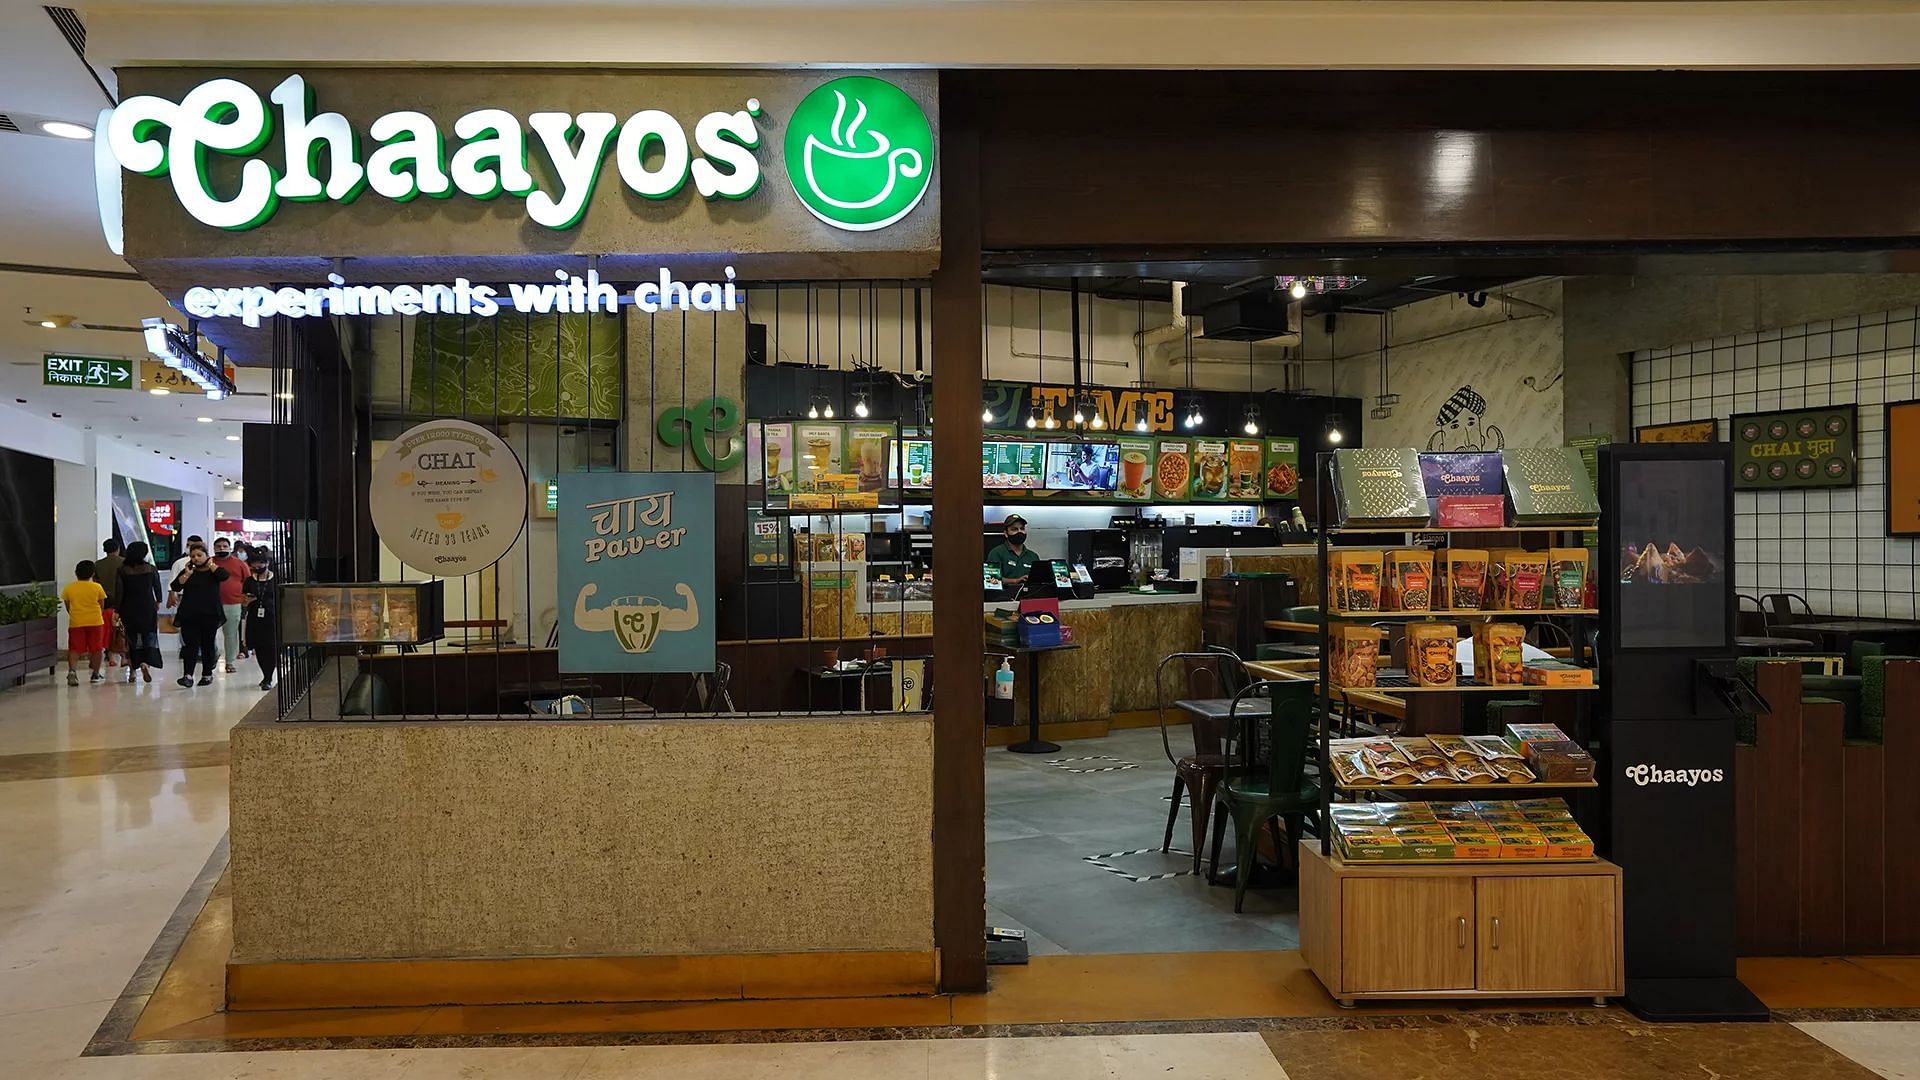 <div class="paragraphs"><p>Popular tea brand <a href="https://www.thequint.com/topic/chaayos">Chaayos</a> faced severe fire on Thursday, 2 September after social media users noticed and pointed out that it's official <a href="https://www.thequint.com/topic/twitter">Twitter</a> account followed a radical group's account and liked several 'offensive' tweets.</p></div>